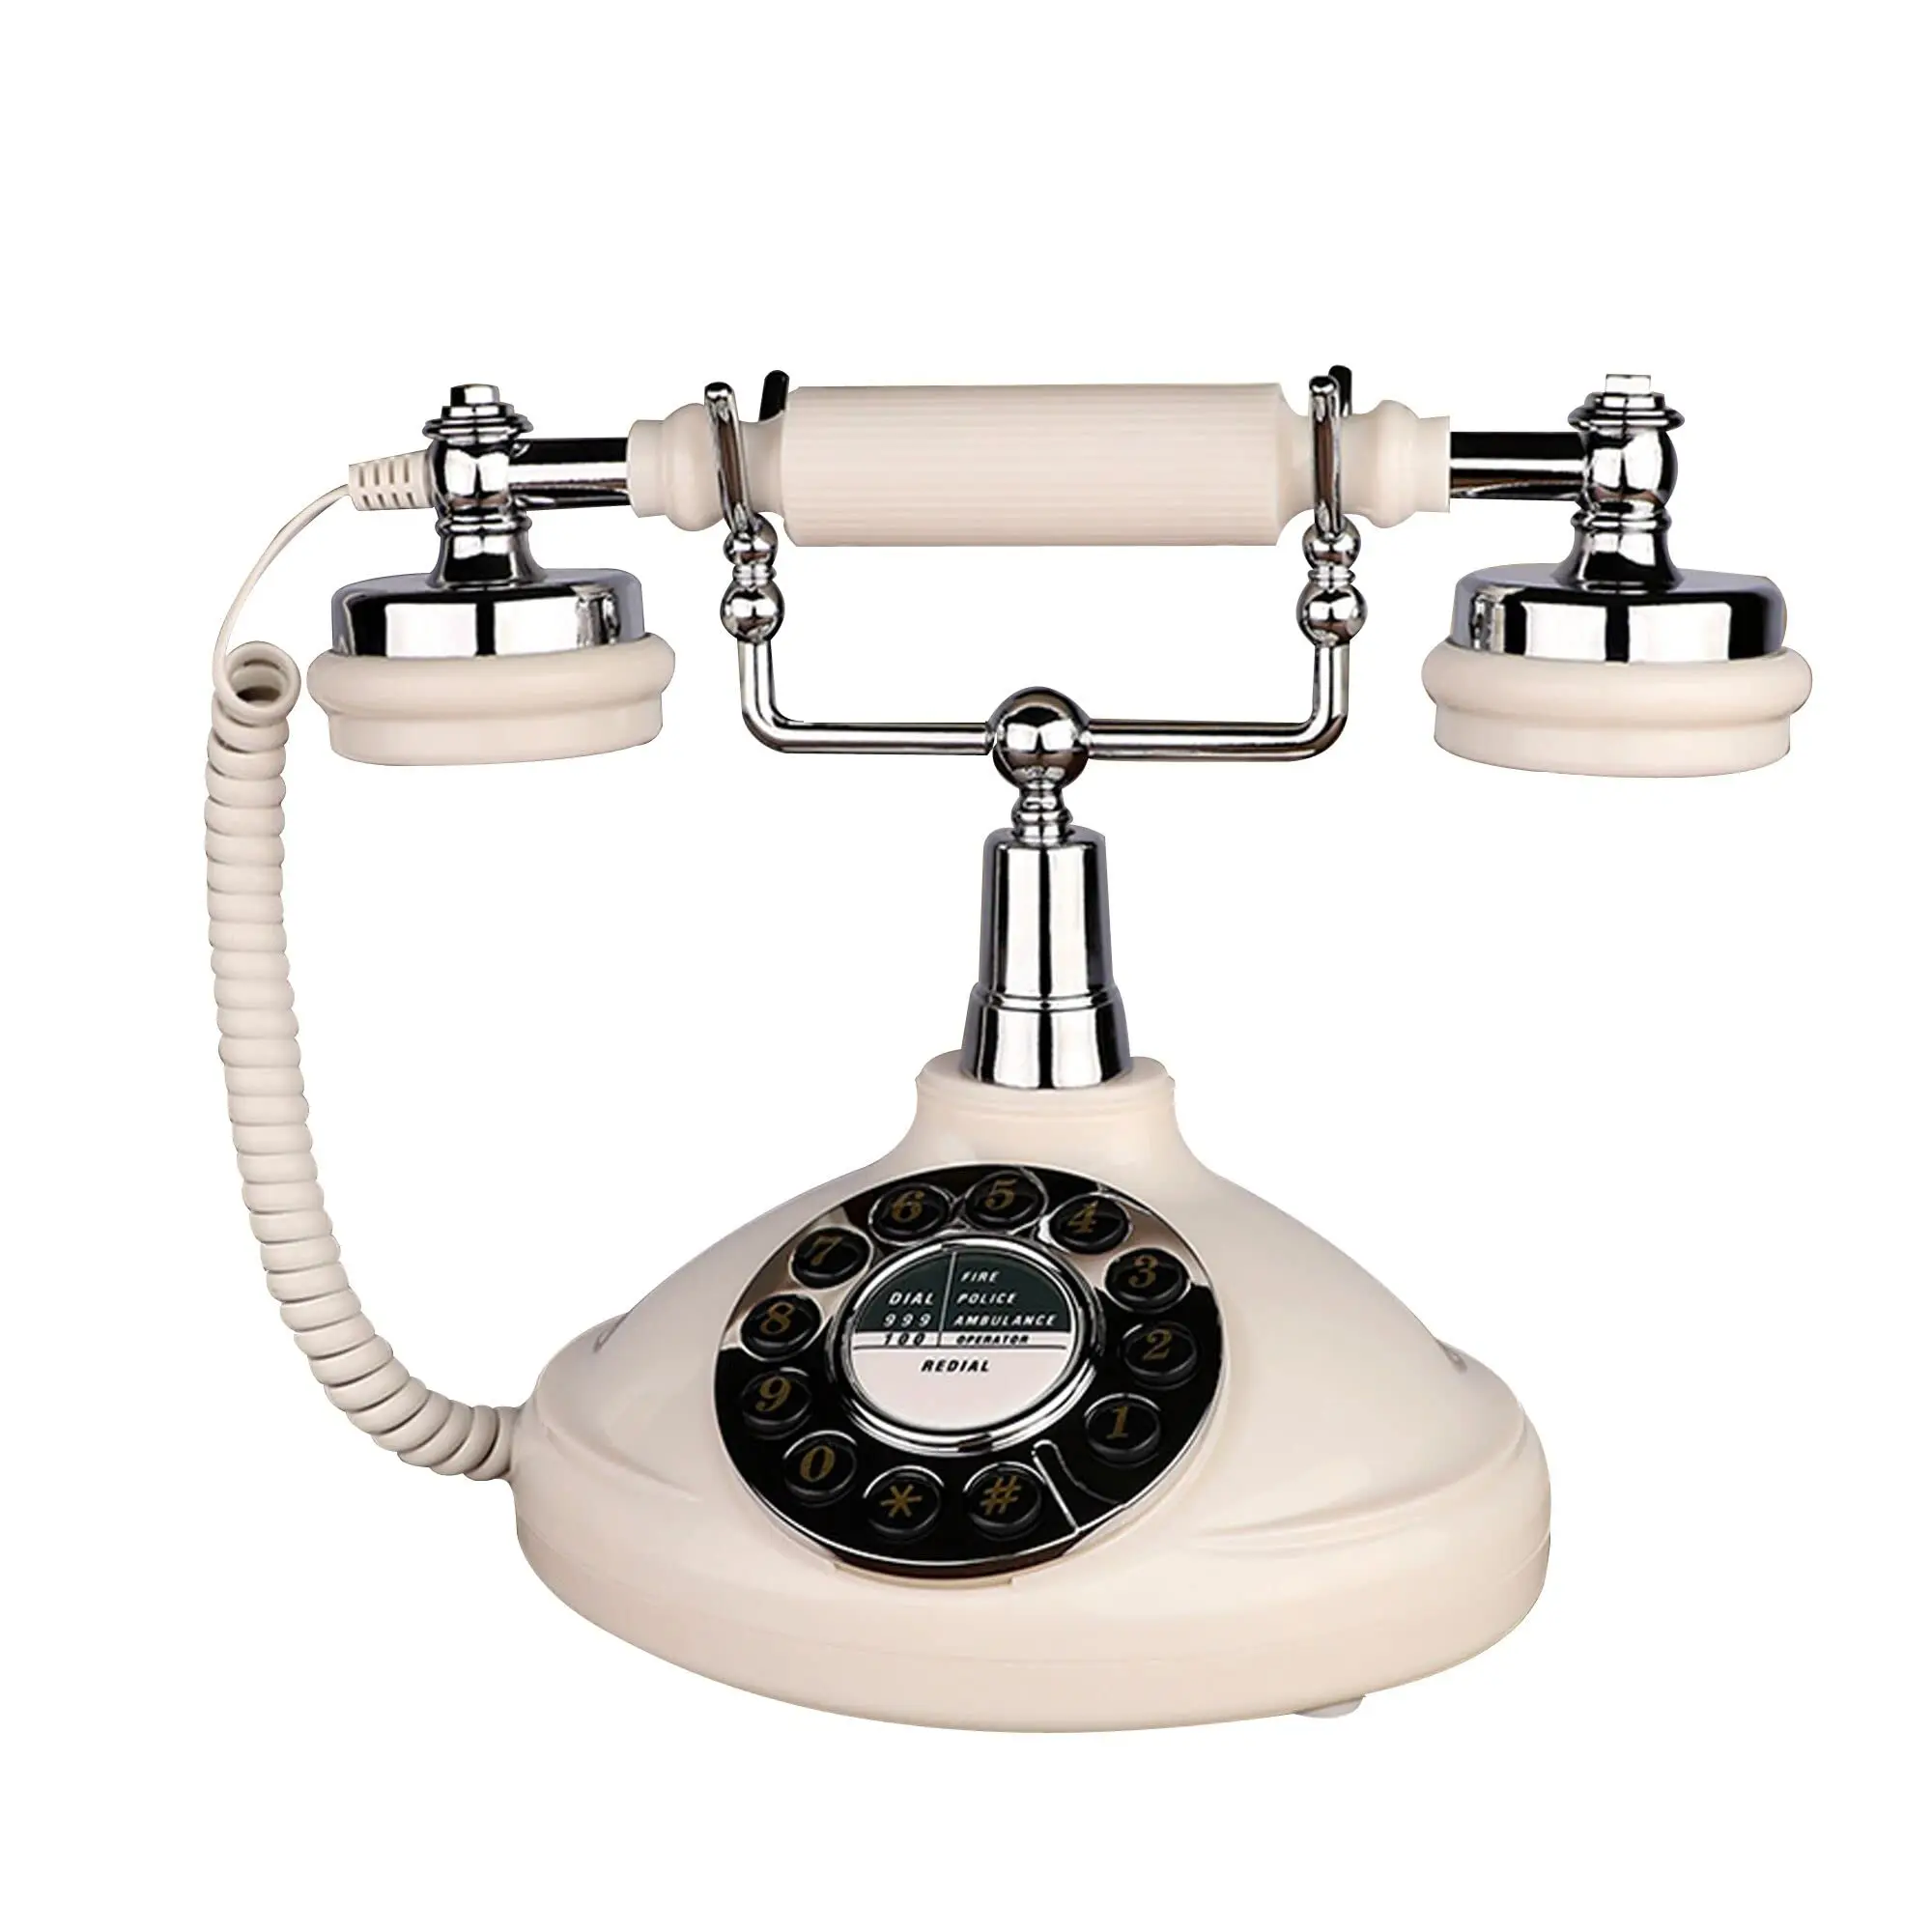 Retro Corded Landline Phone, TelPal White Classic Vintage Old Fashion Telephone for Home & Office, Wired Antique Home Phone Gift